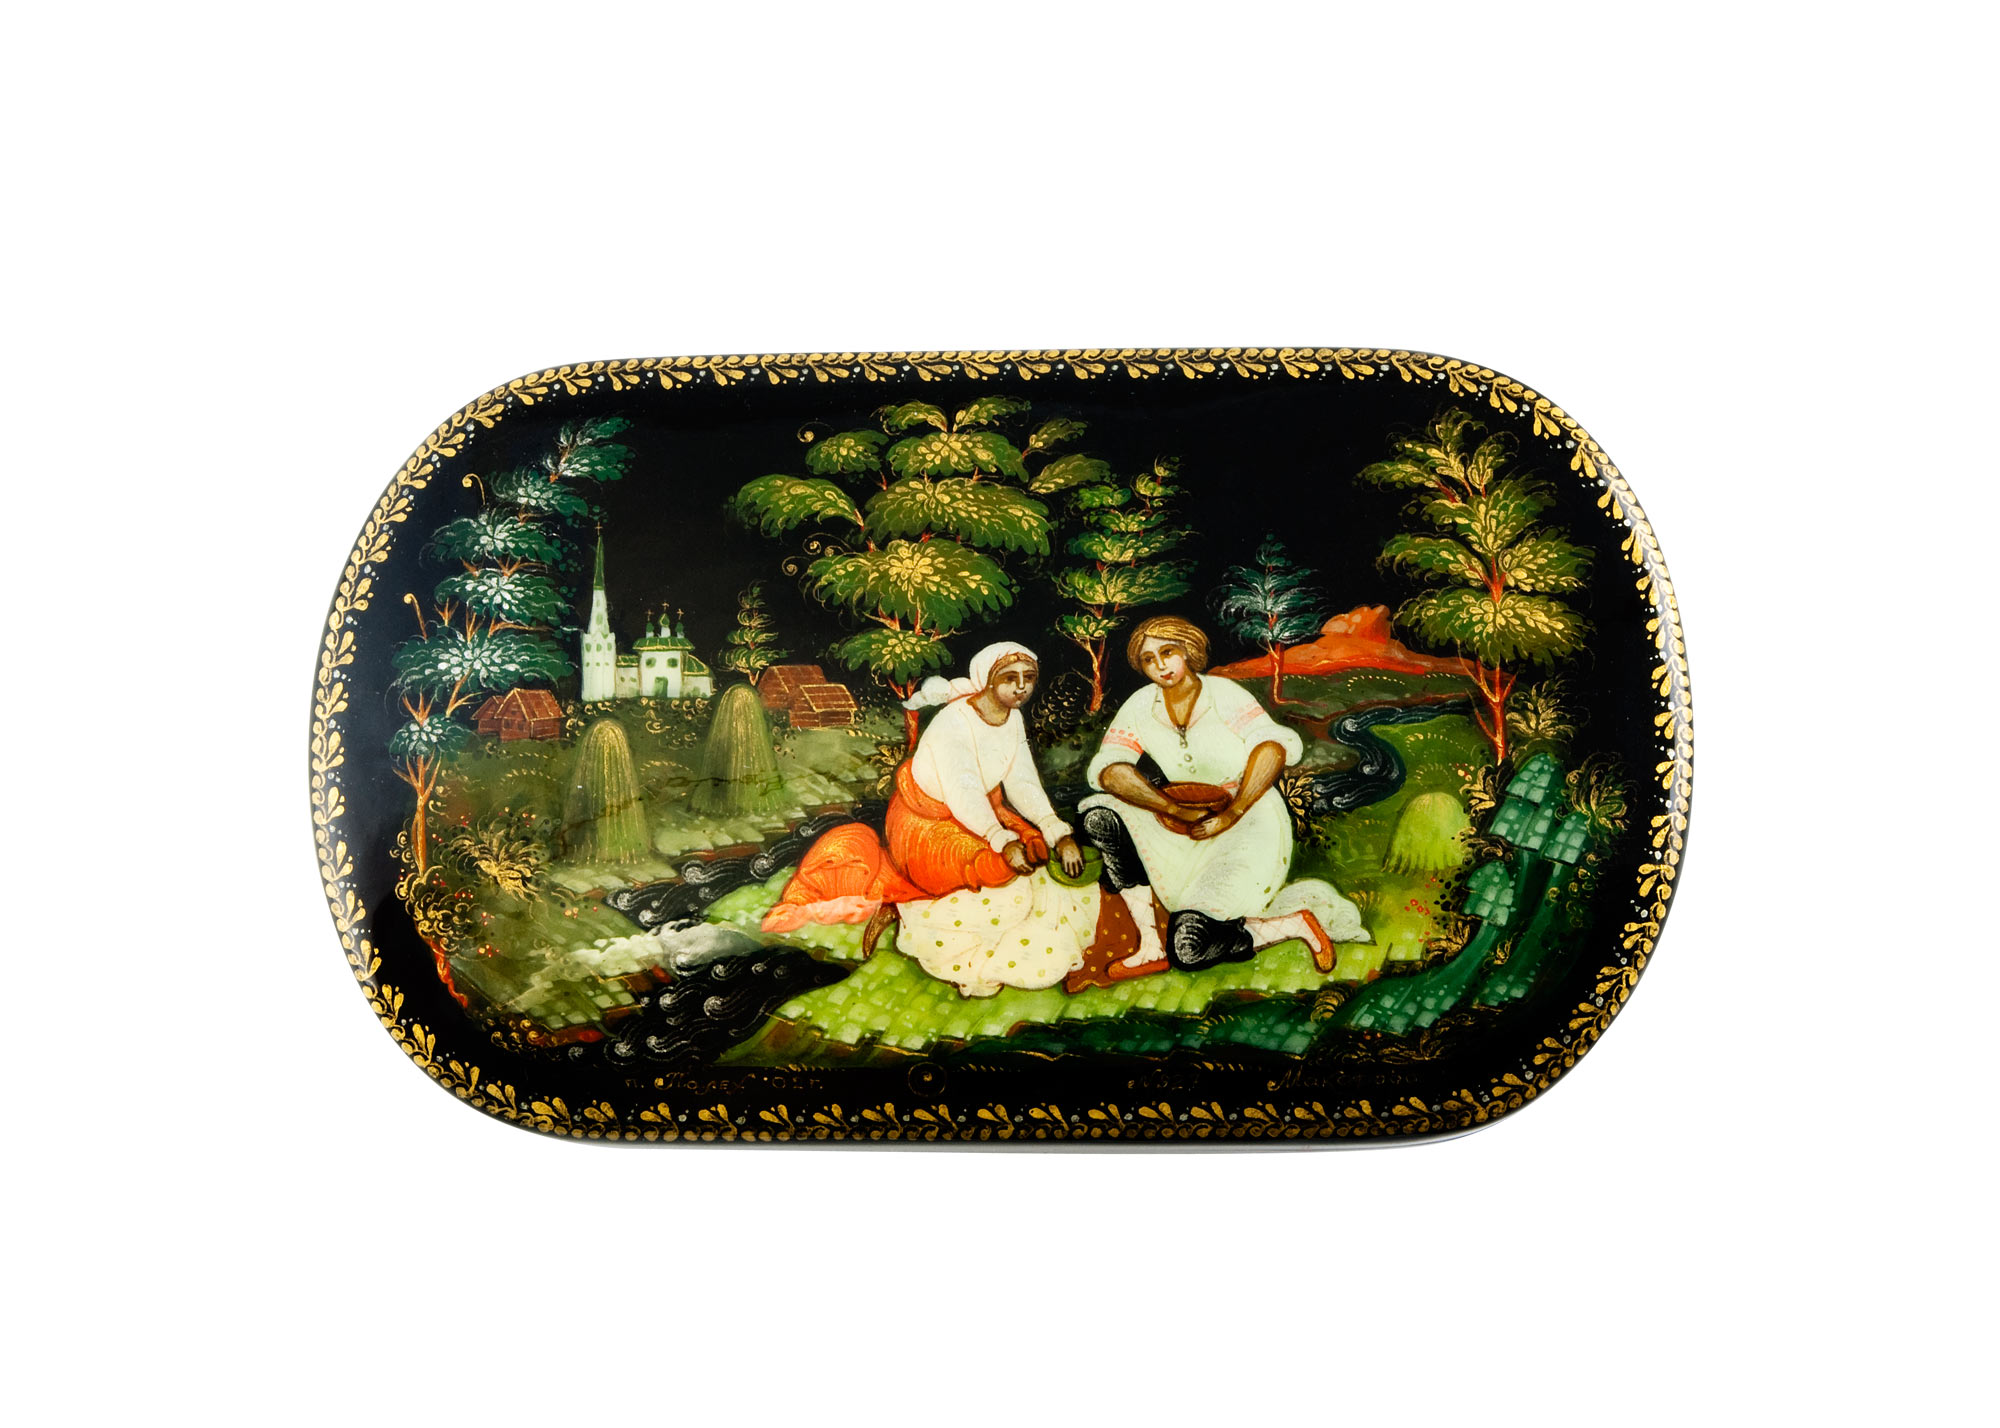 Buy Going for Water Lacquer Box at GoldenCockerel.com